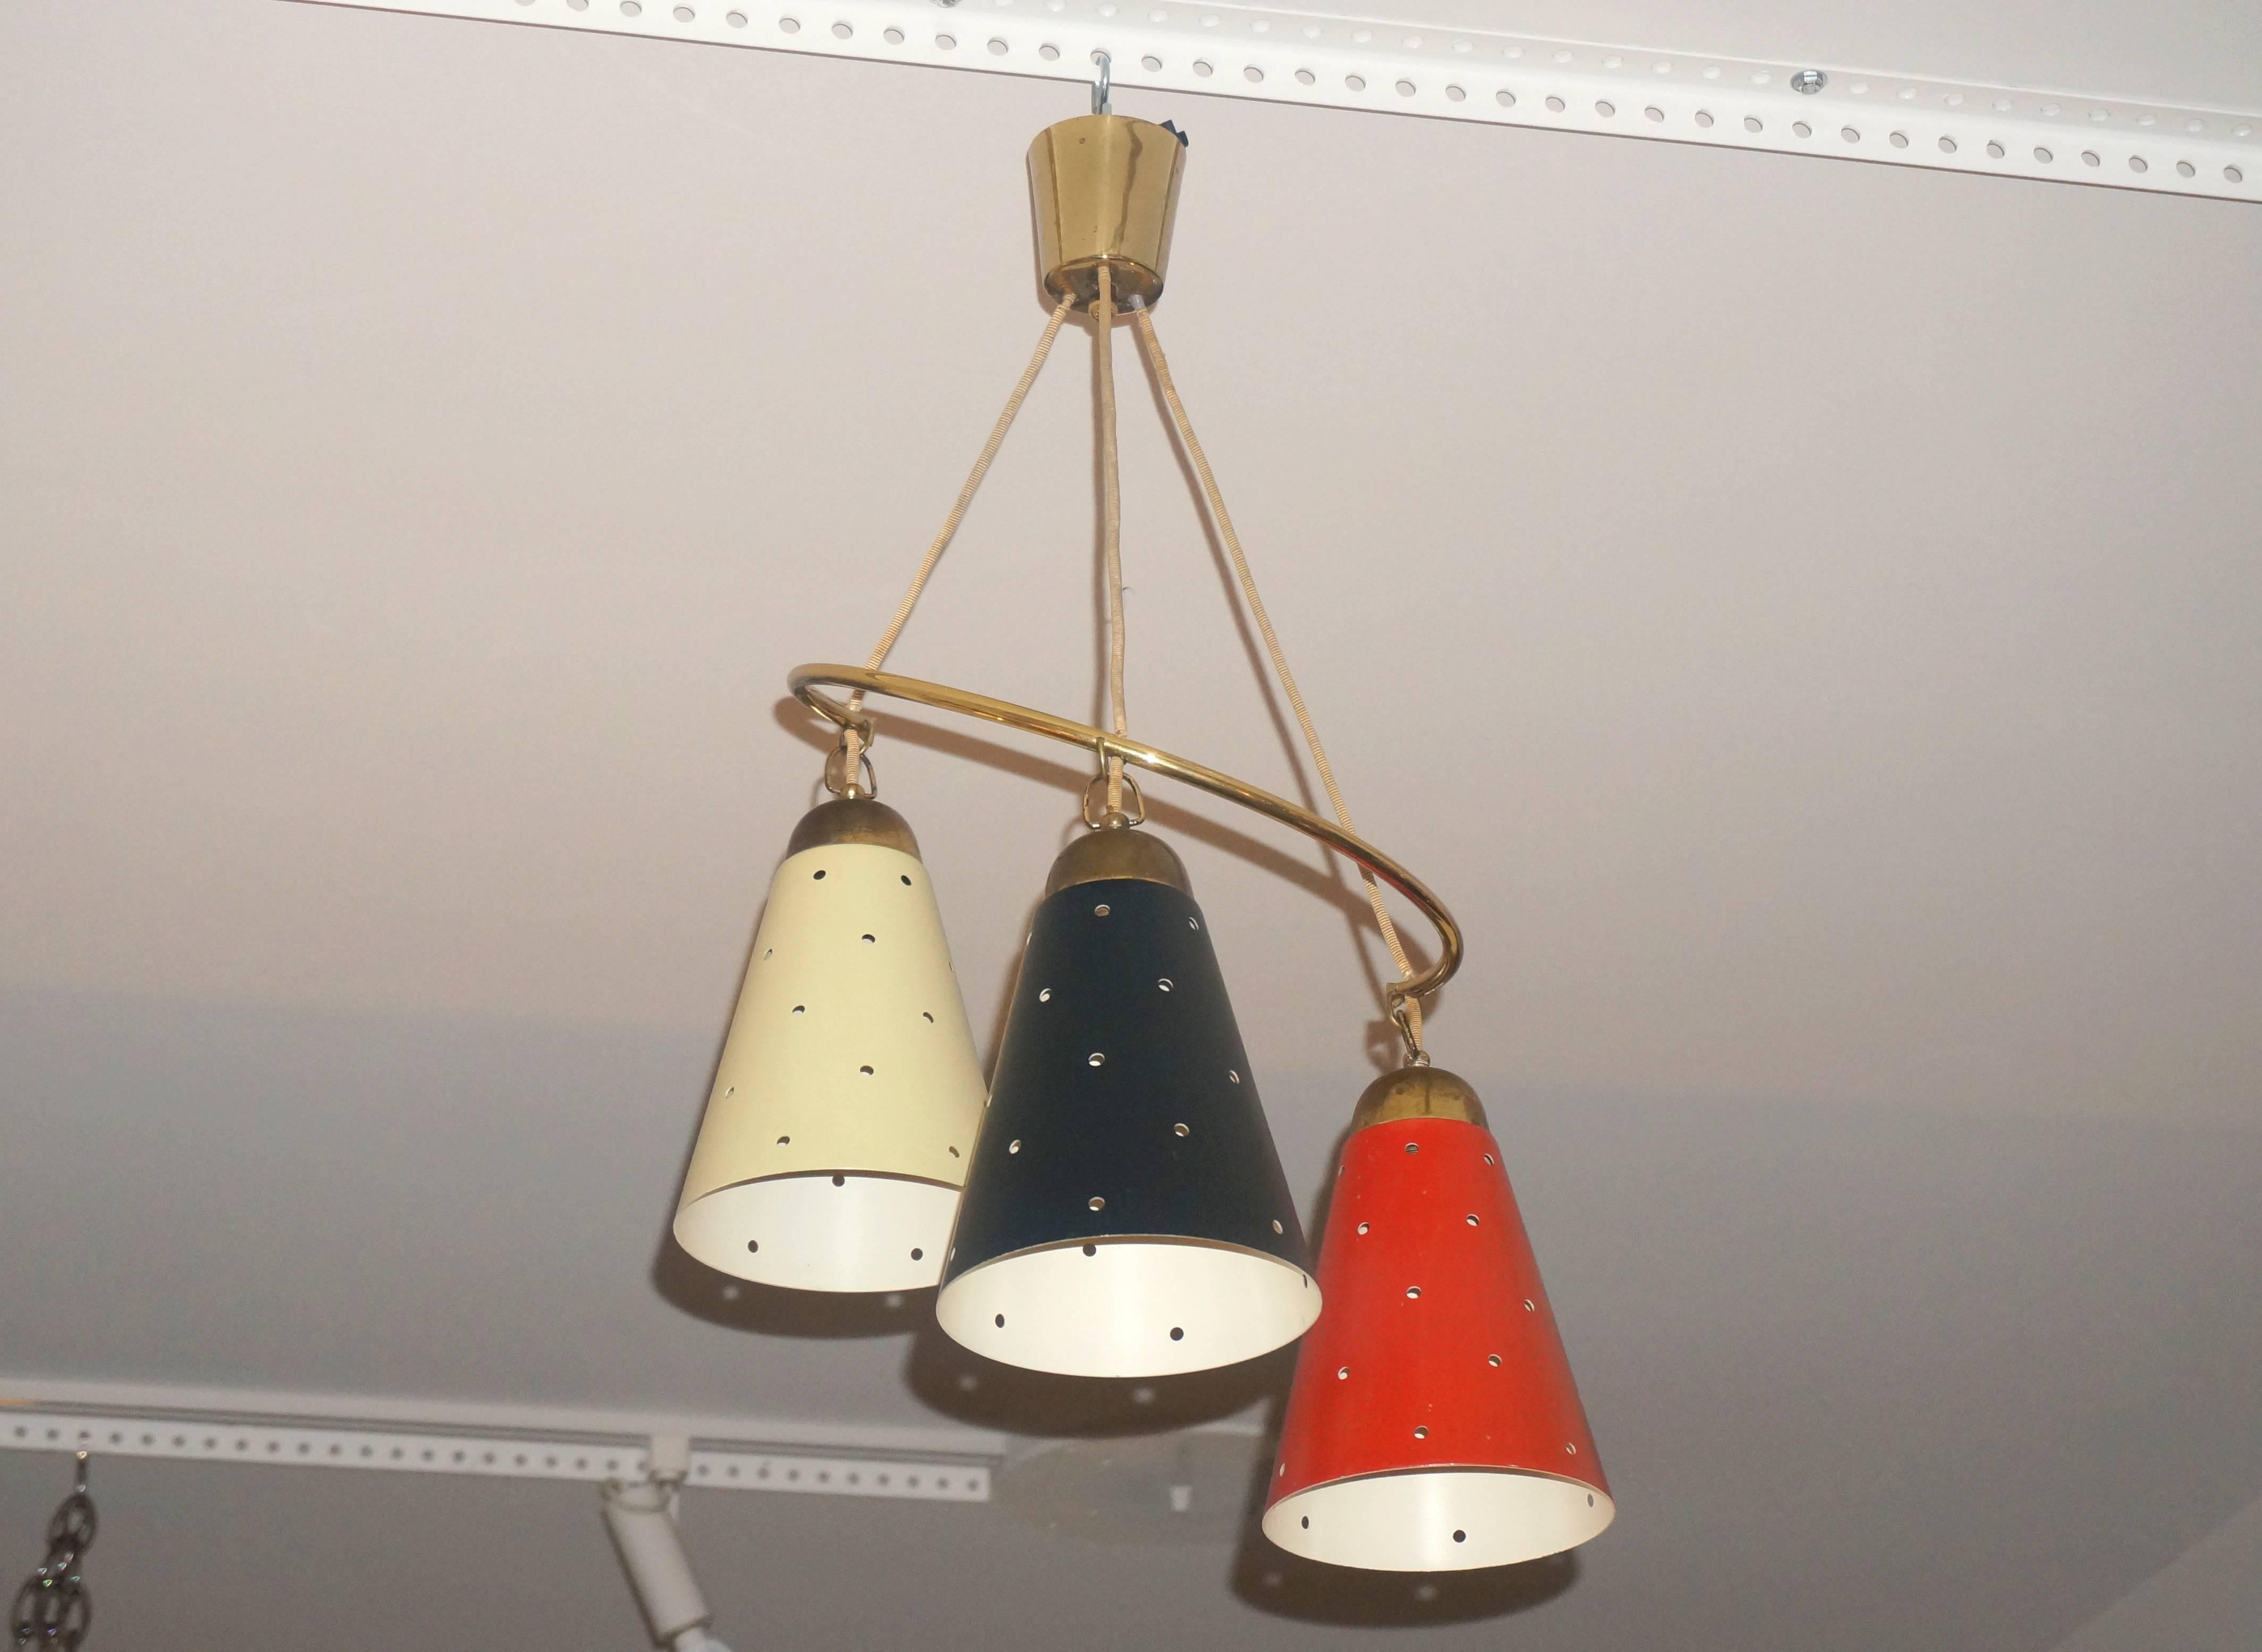 Italian Mid-Century Modern Chandelier, Multicolored Enameled Shades and Brass, Italy